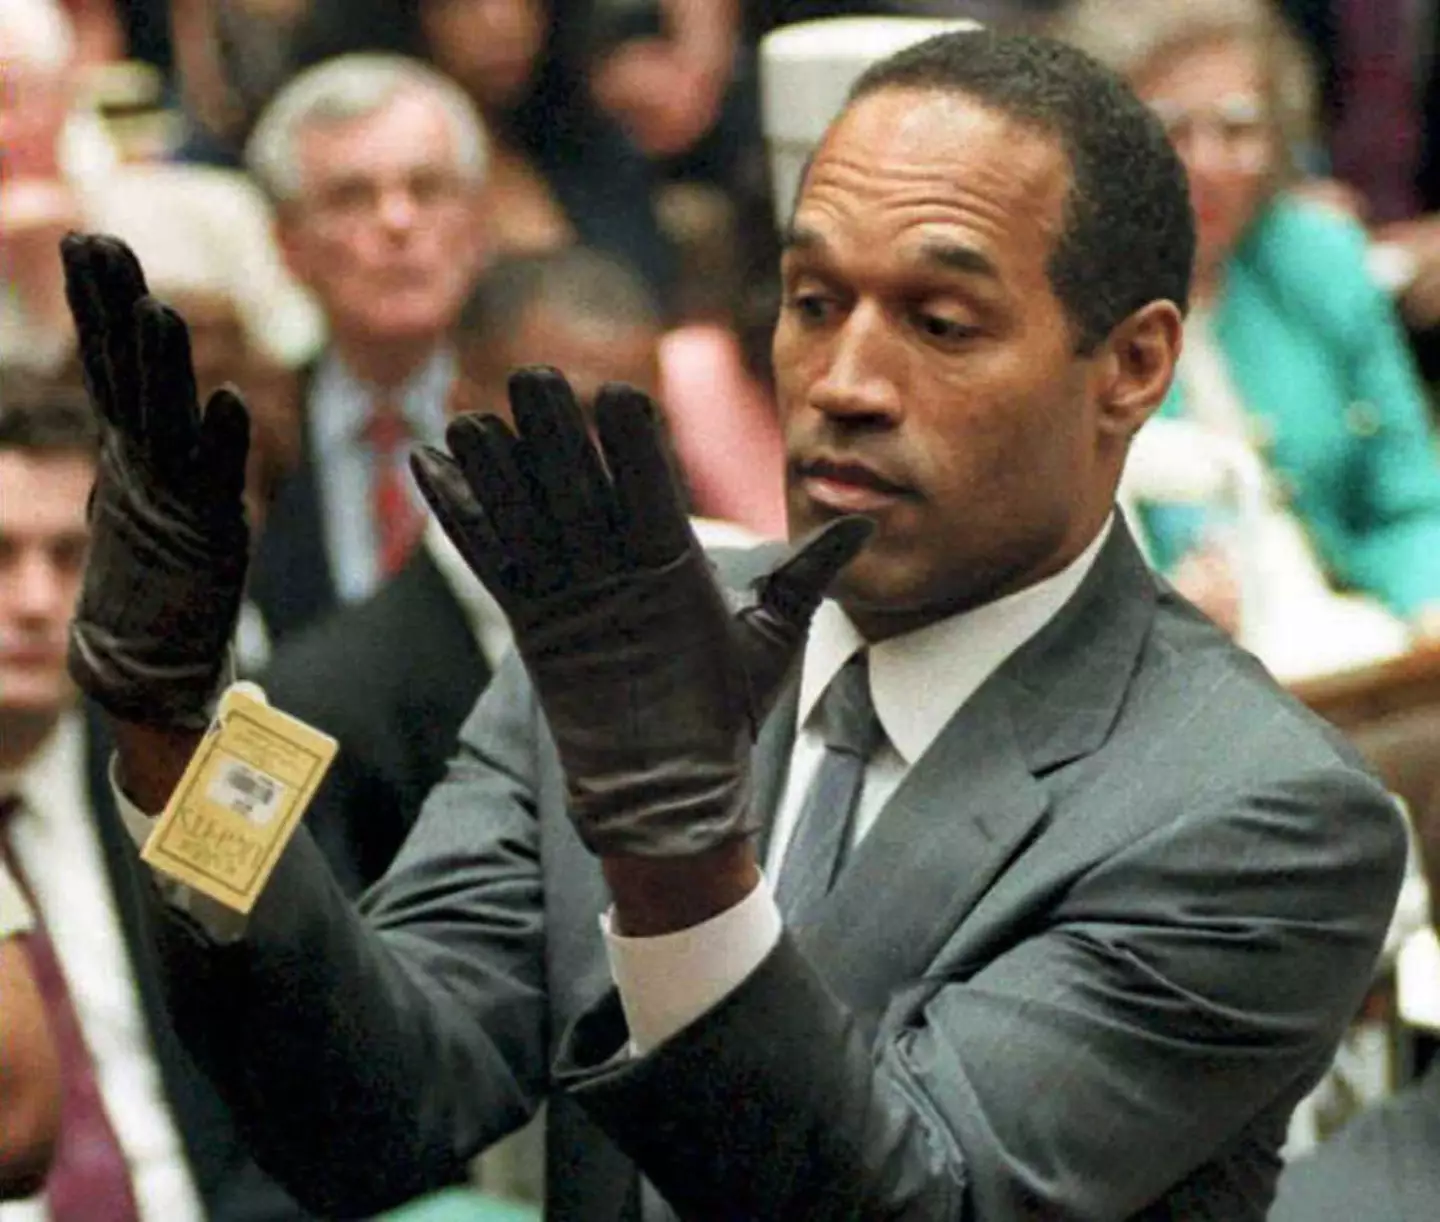 Simpson during the murder trial in 1995. (VINCE BUCCI/AFP via Getty Images)